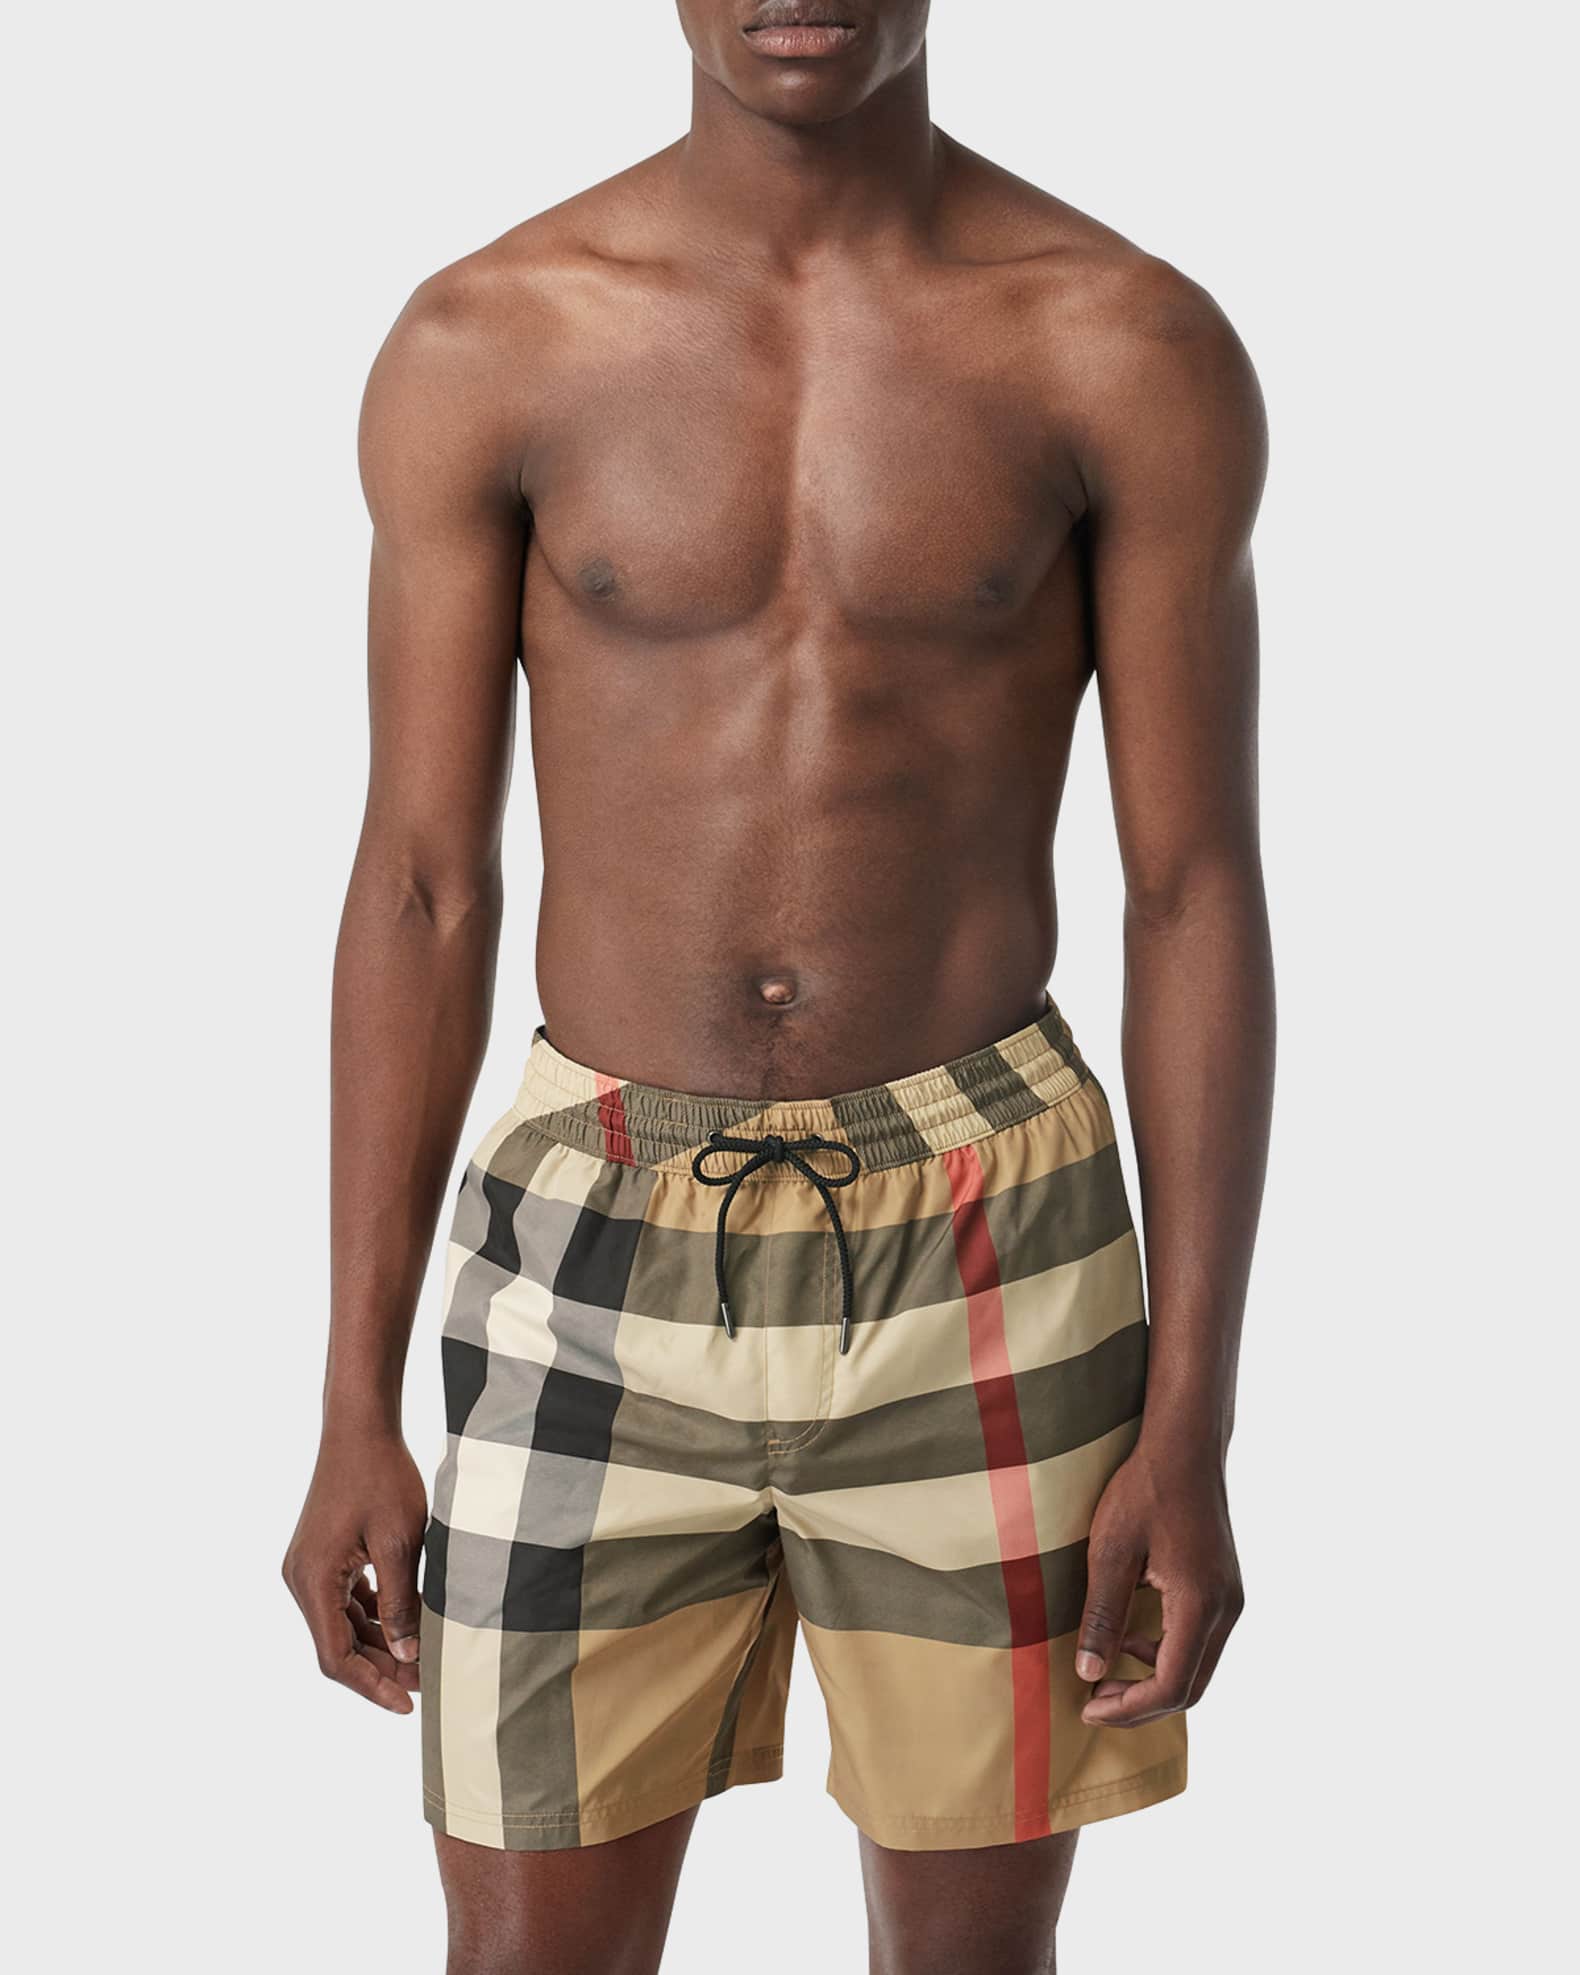 Guildes Vintage Check Swim Shorts in Beige - Burberry